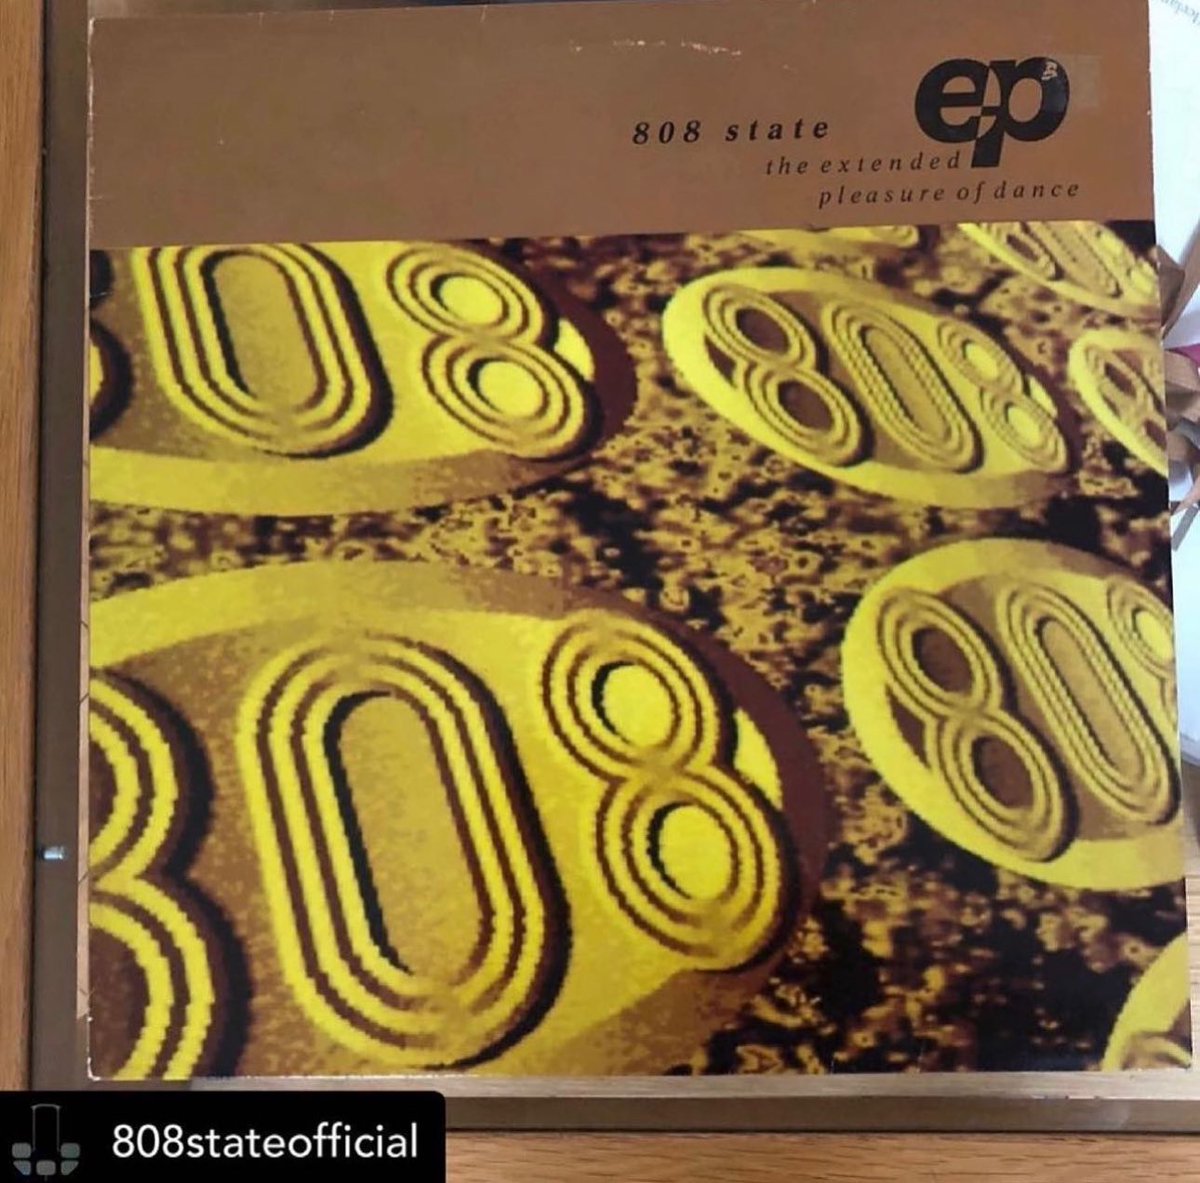 Released in the UK on this day in 1990, the ‘Extended Pleasures of Dance’ EP by @state808. “Ancodia” (Taters Deep Nit Funky Beat Mix) was my jam off this legendary ep. Happy 34th anniversary! #cobrabora #cubik #ancodia #808state computer graphics by Phil Wolstenholme #zttrecords